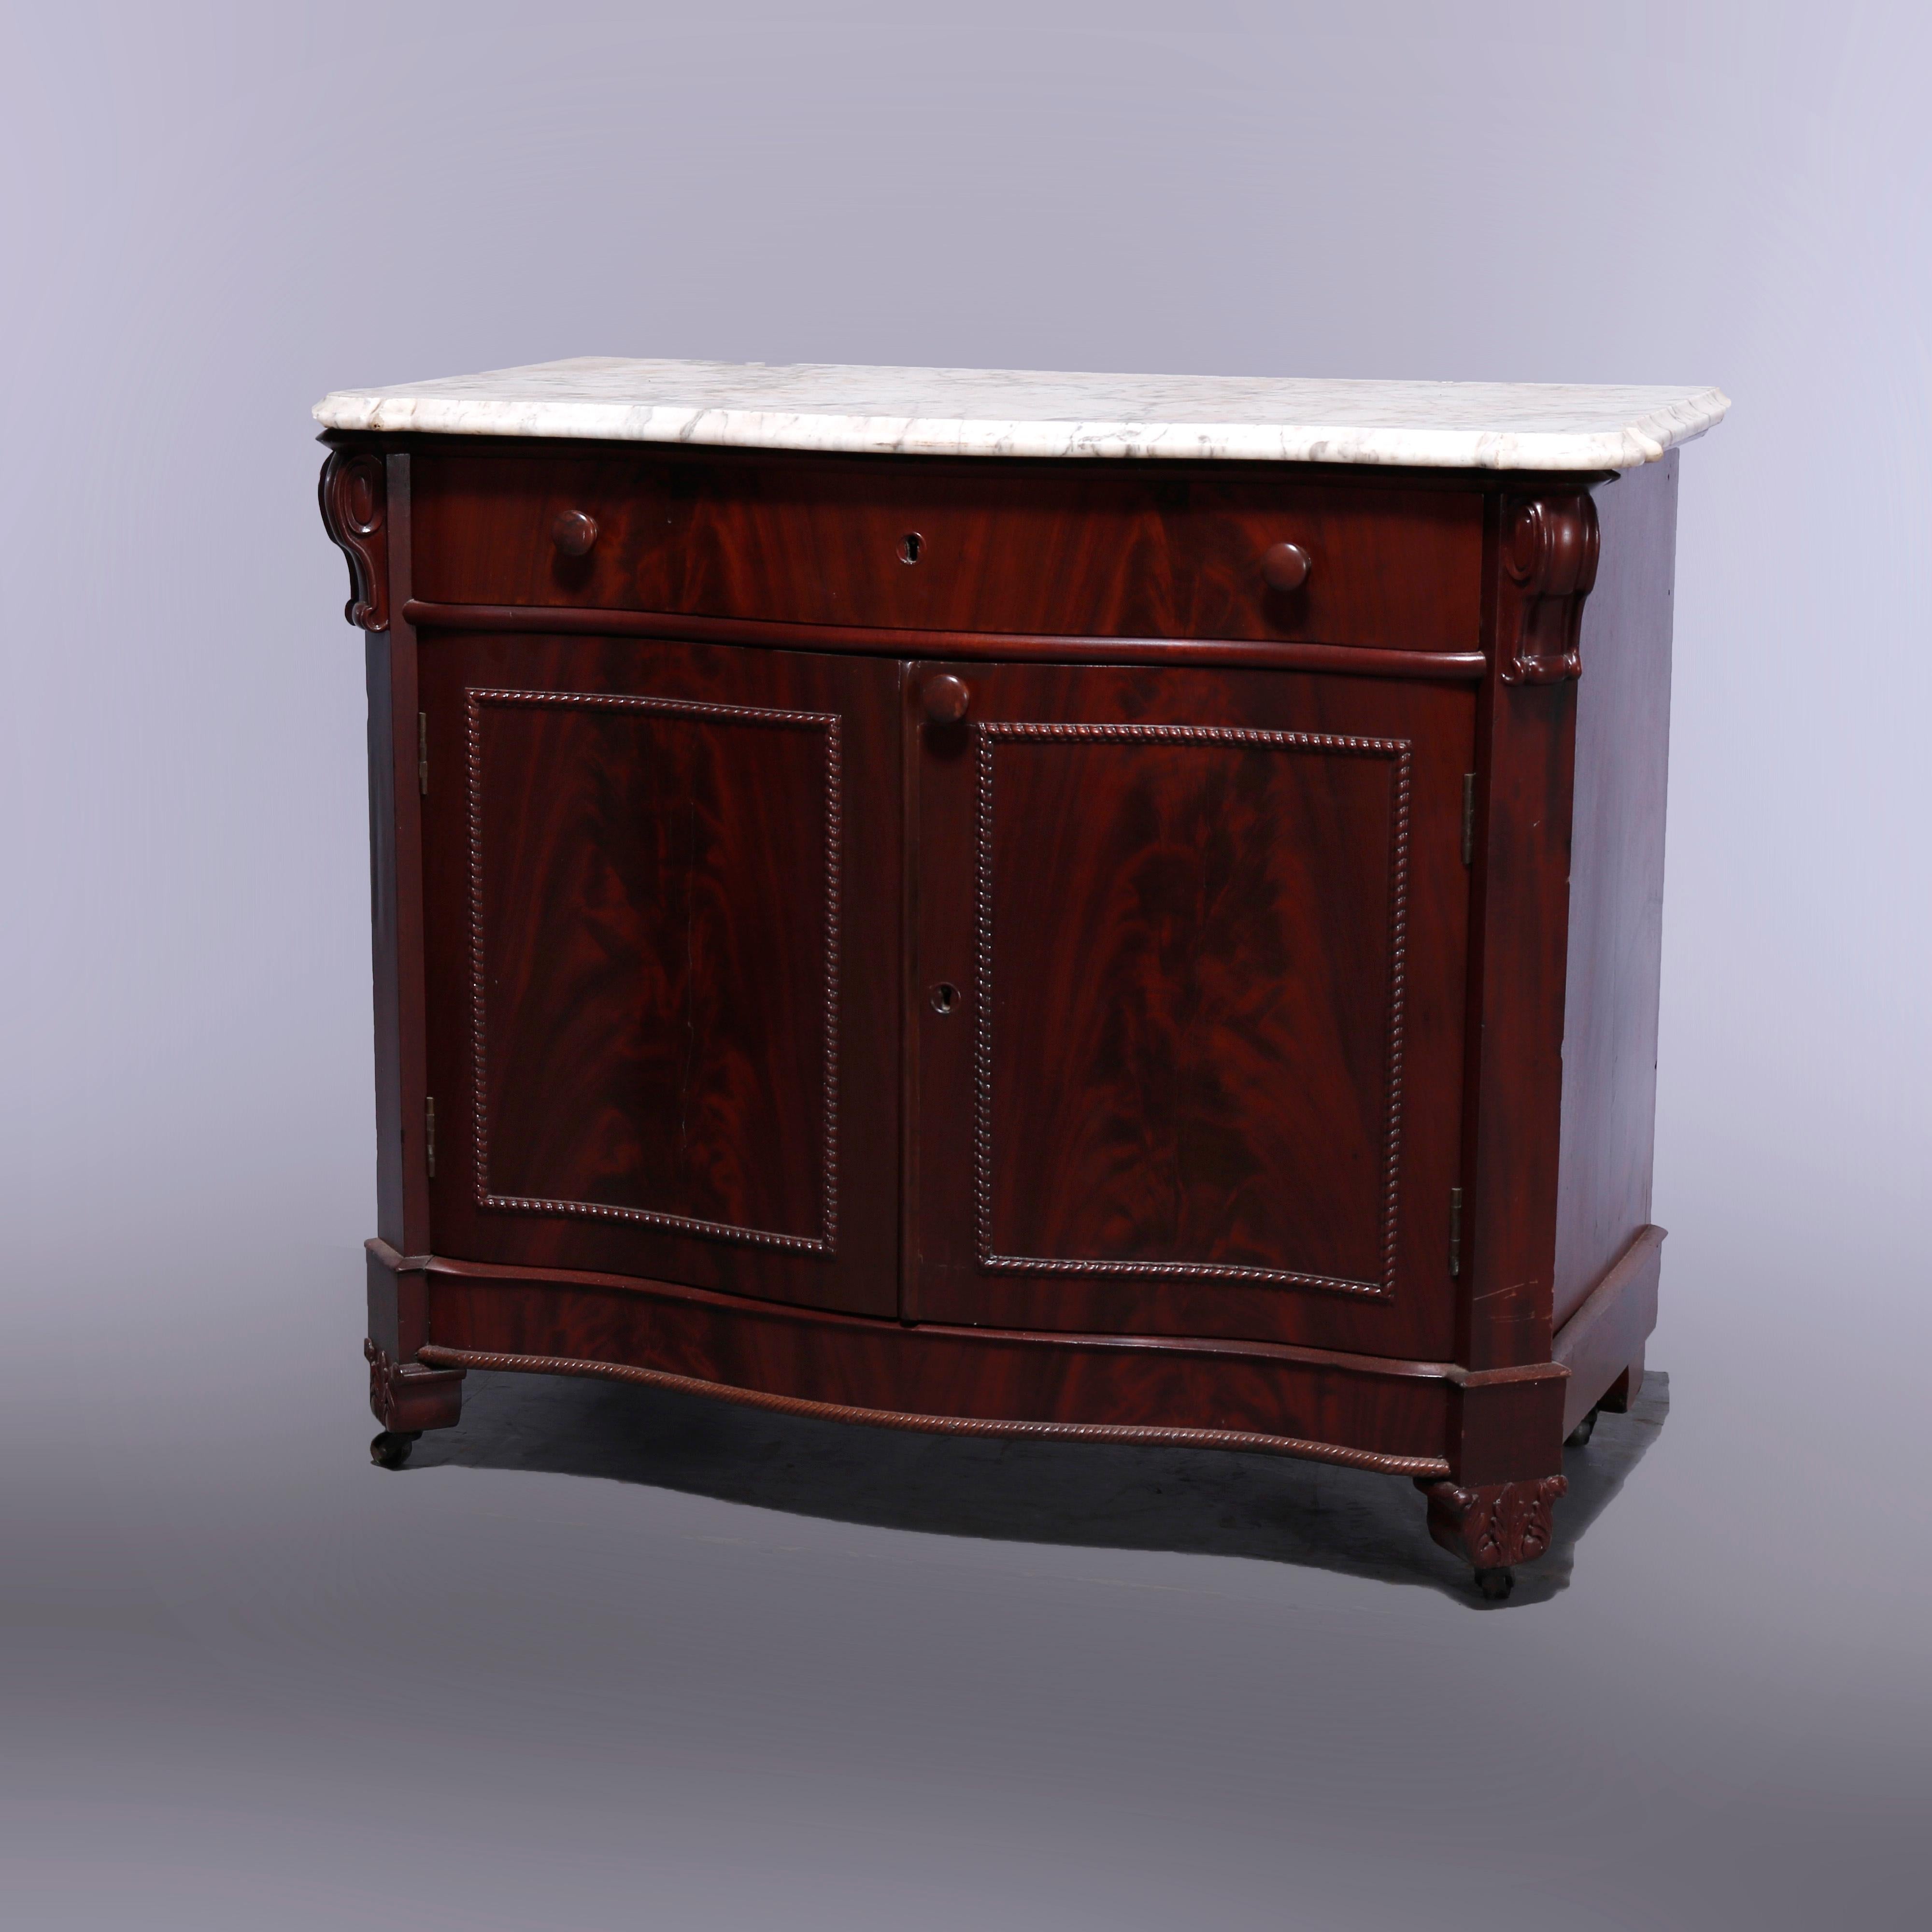 Antique American Empire Flame Mahogany Serpentine Marble-Top Commode, c1860 11